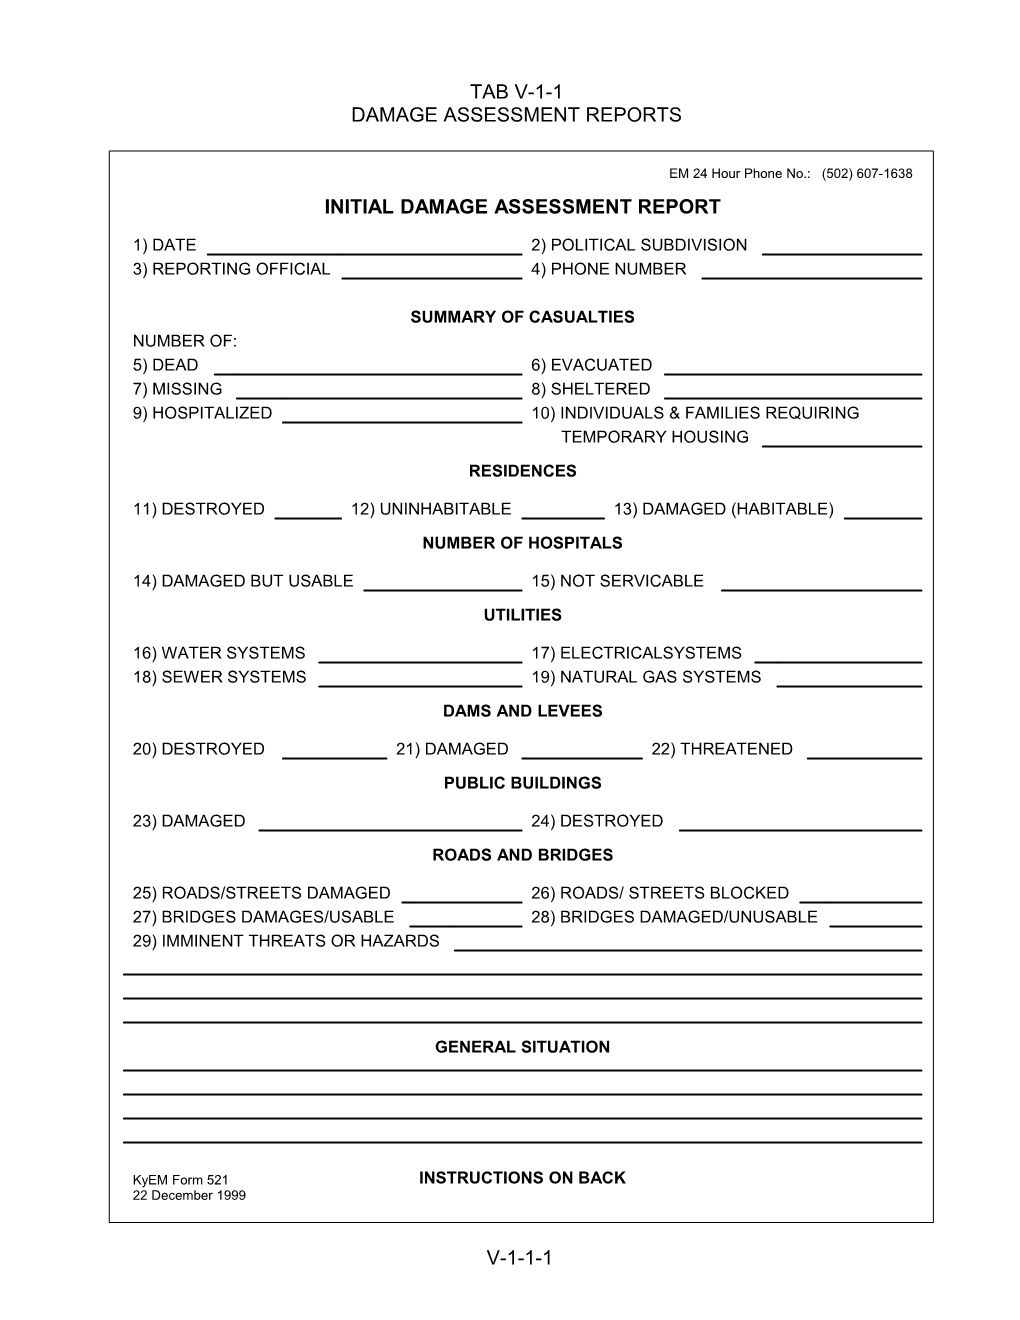 Initial PDA Form